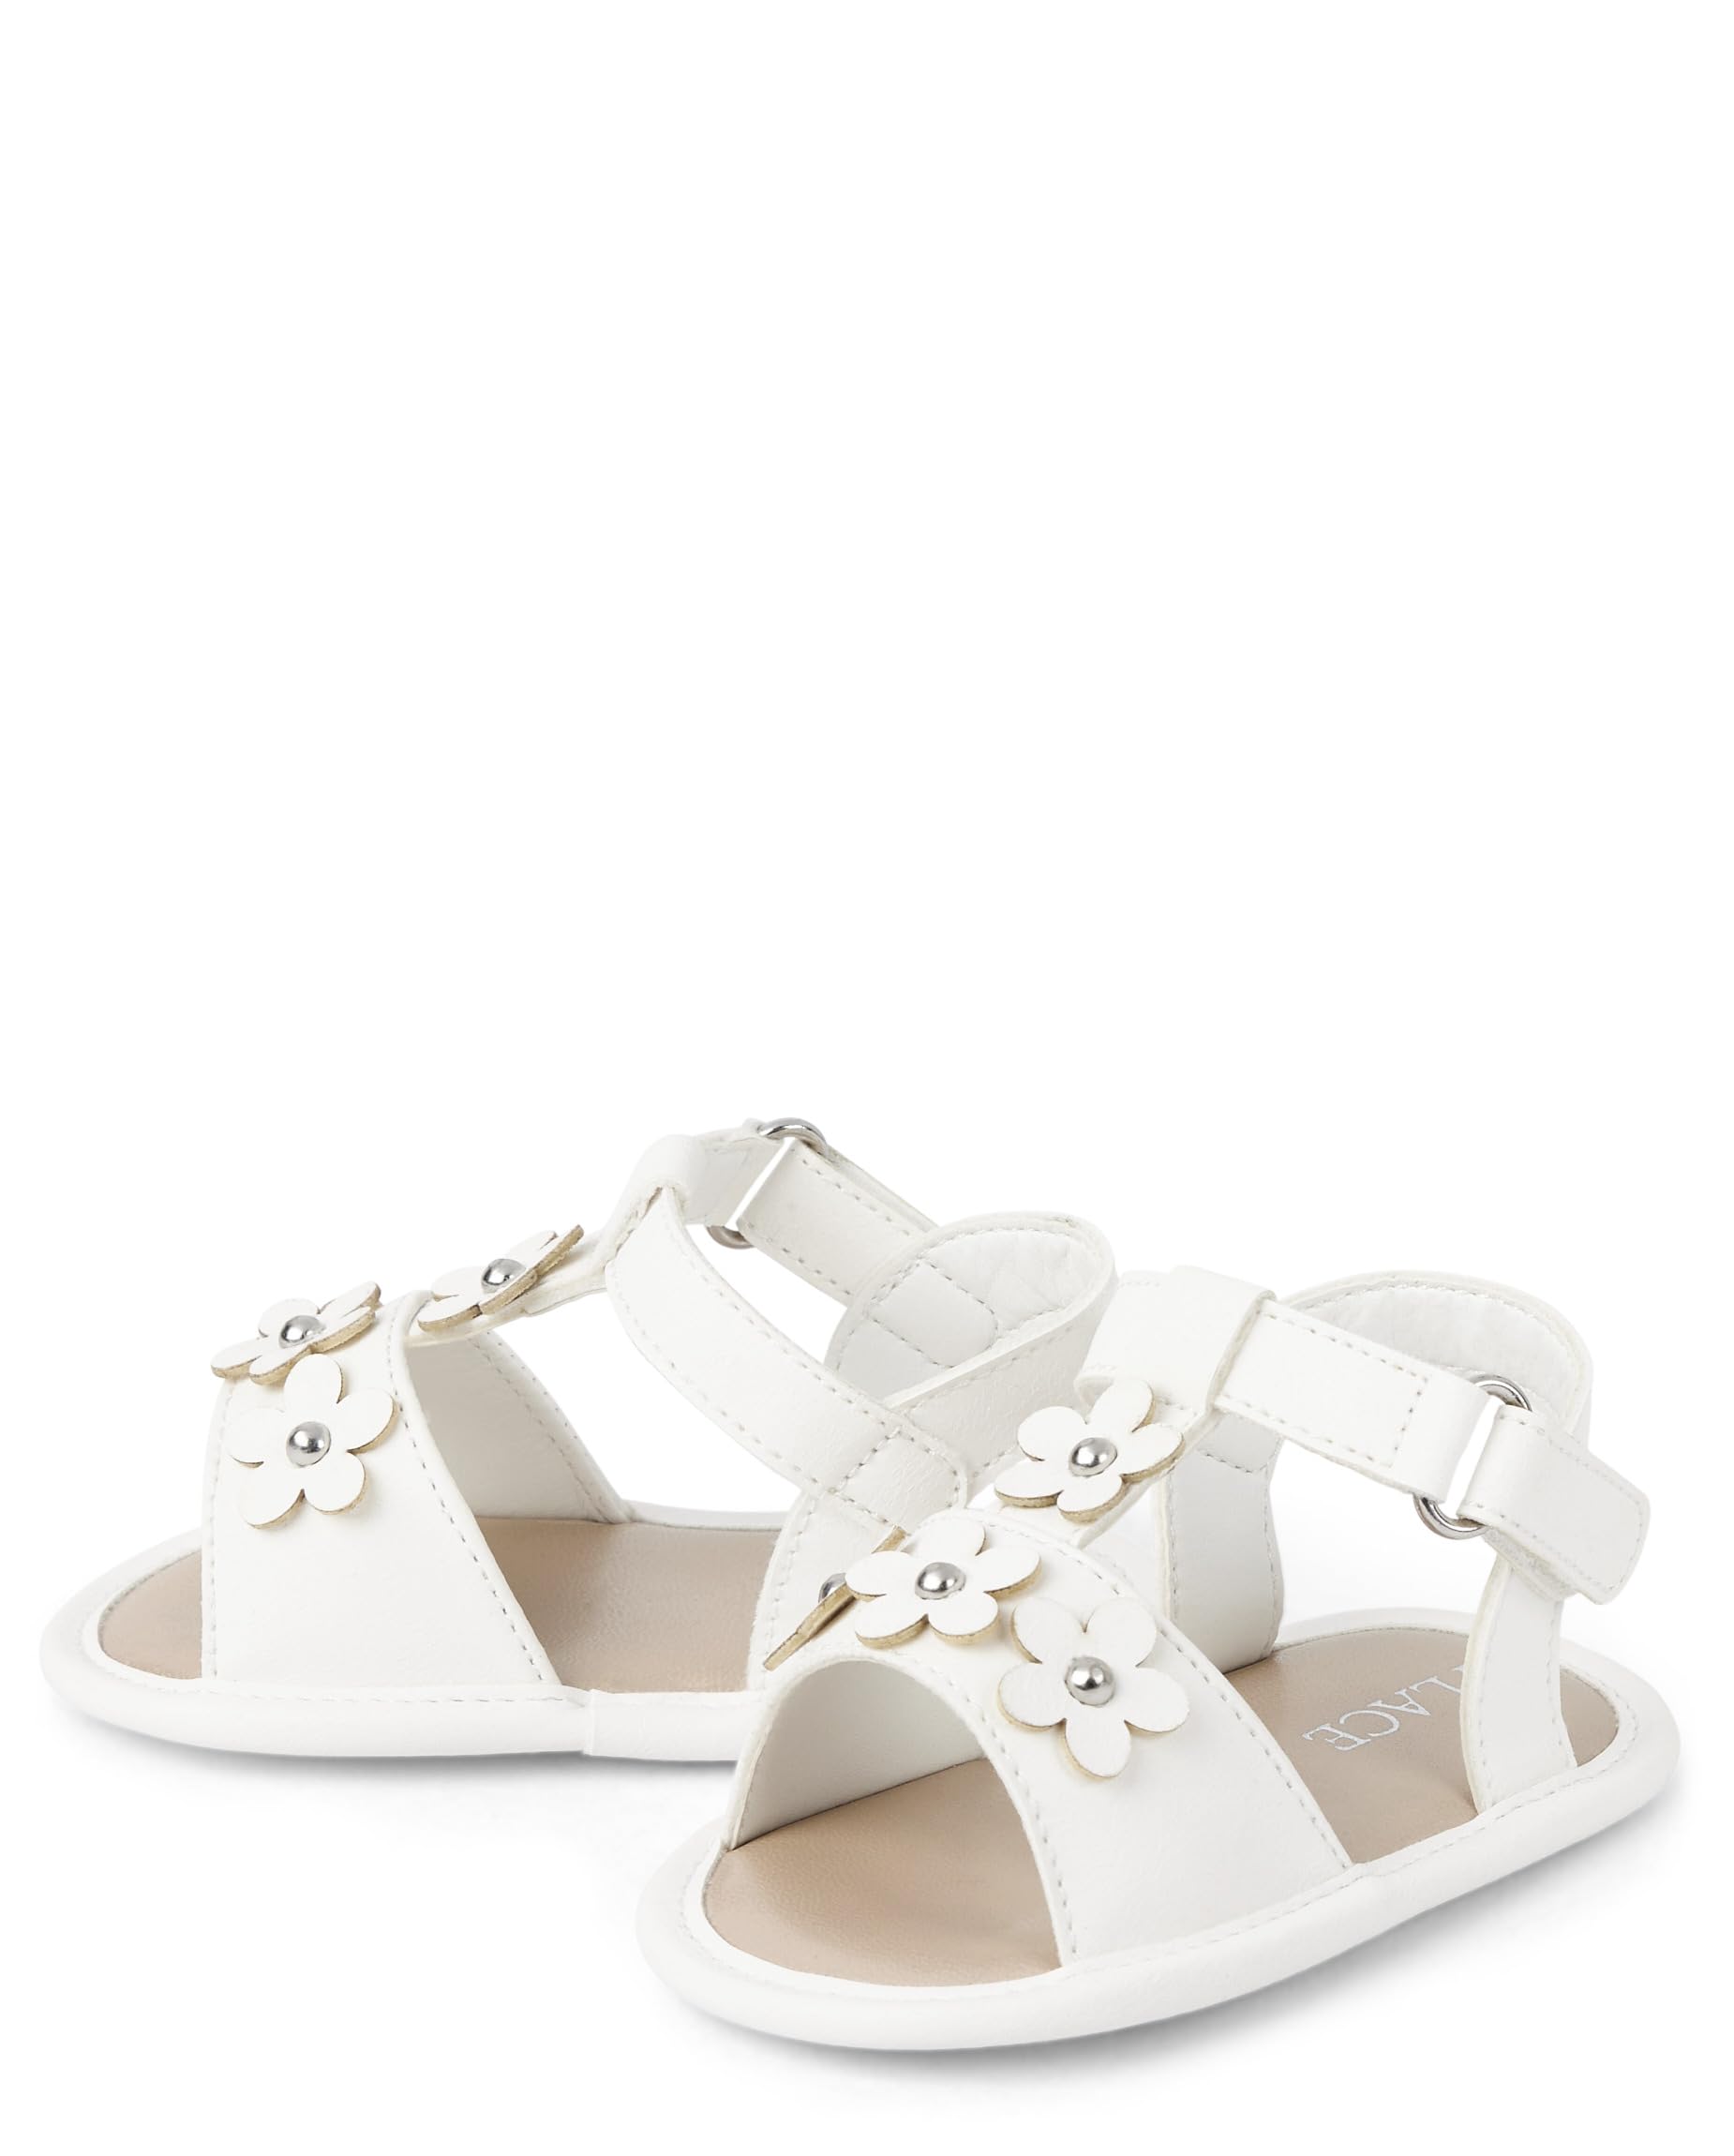 The Children's Place Baby-Girl's and Newborn Open Toe Flat Sandals